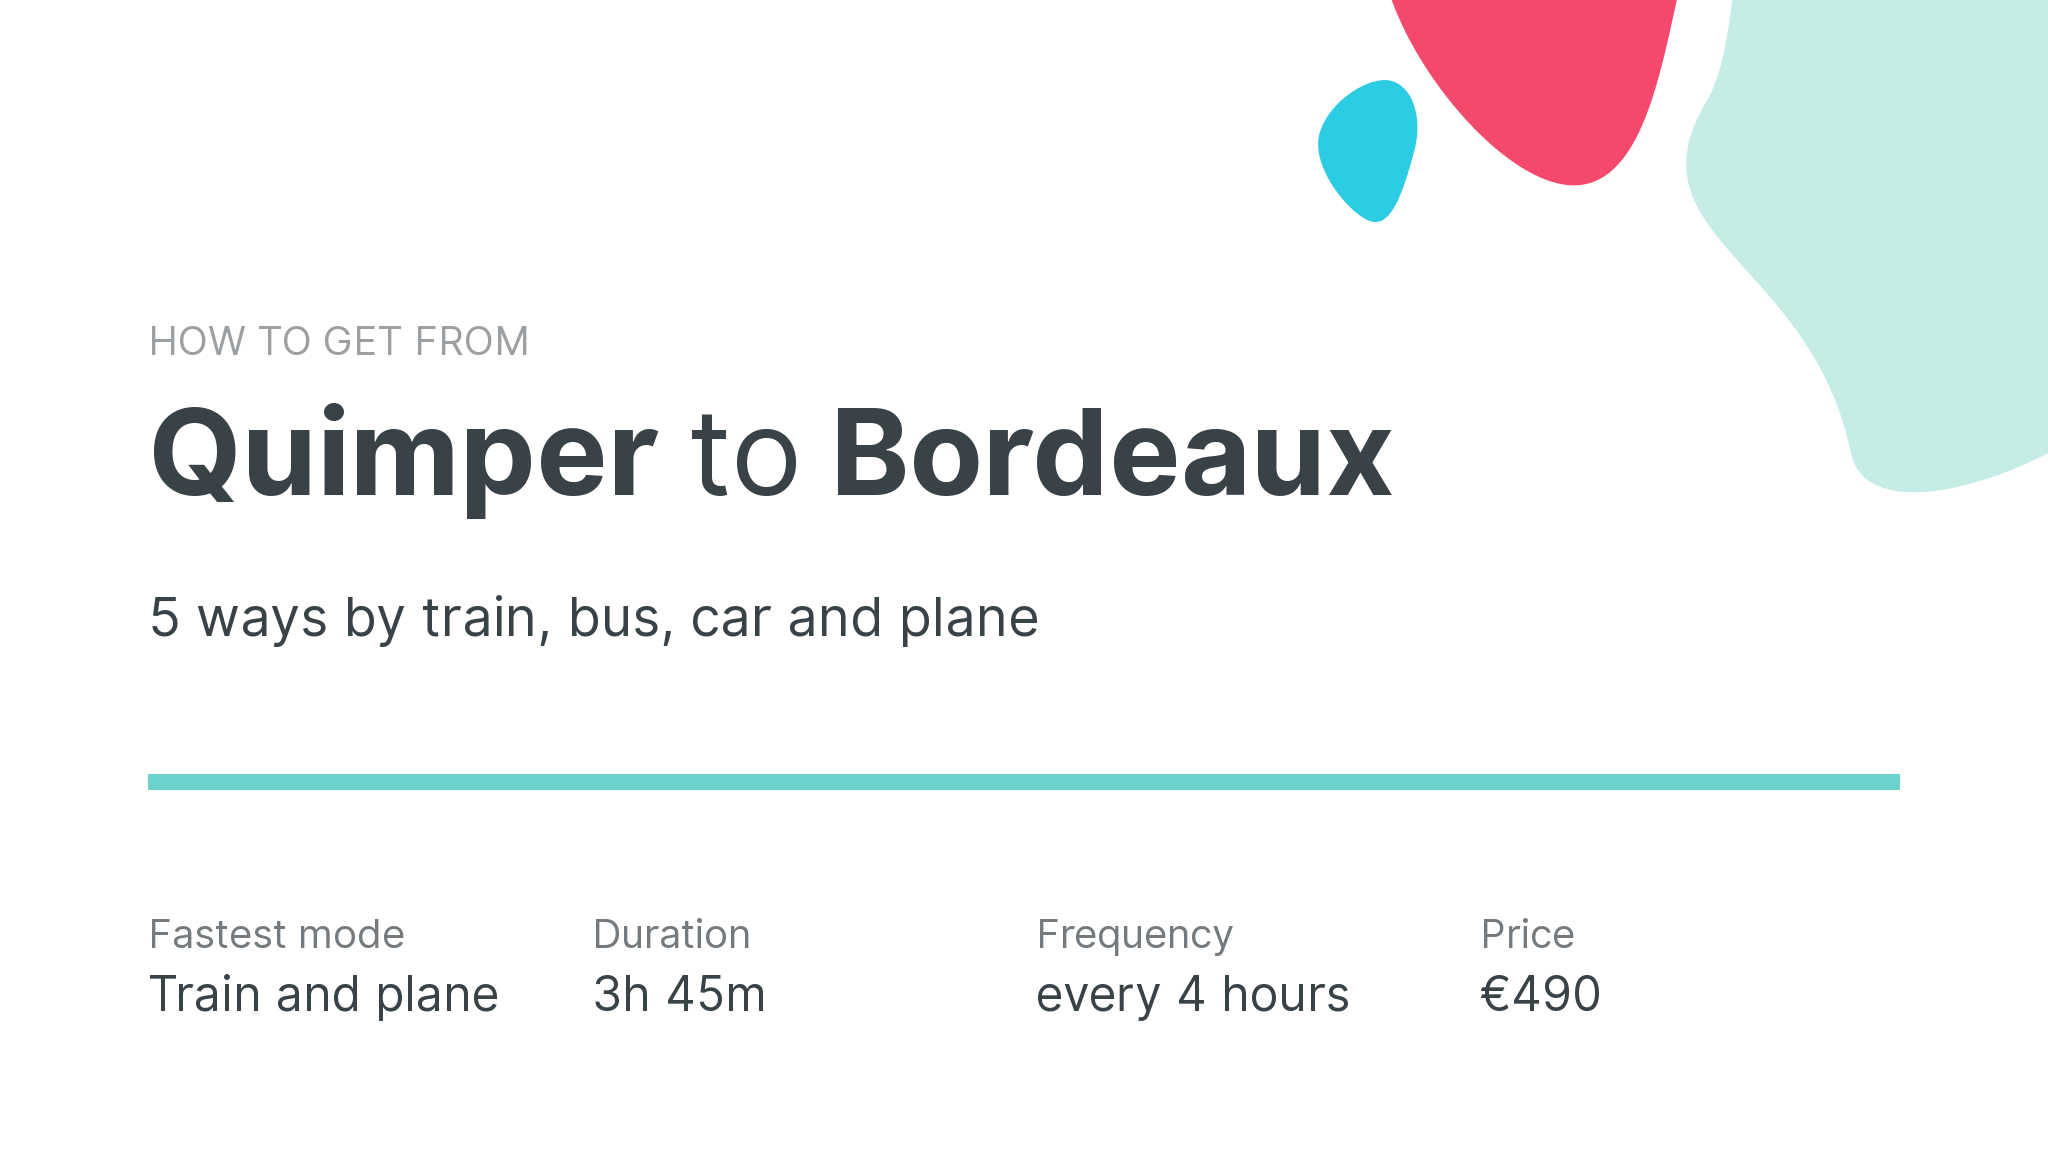 How do I get from Quimper to Bordeaux